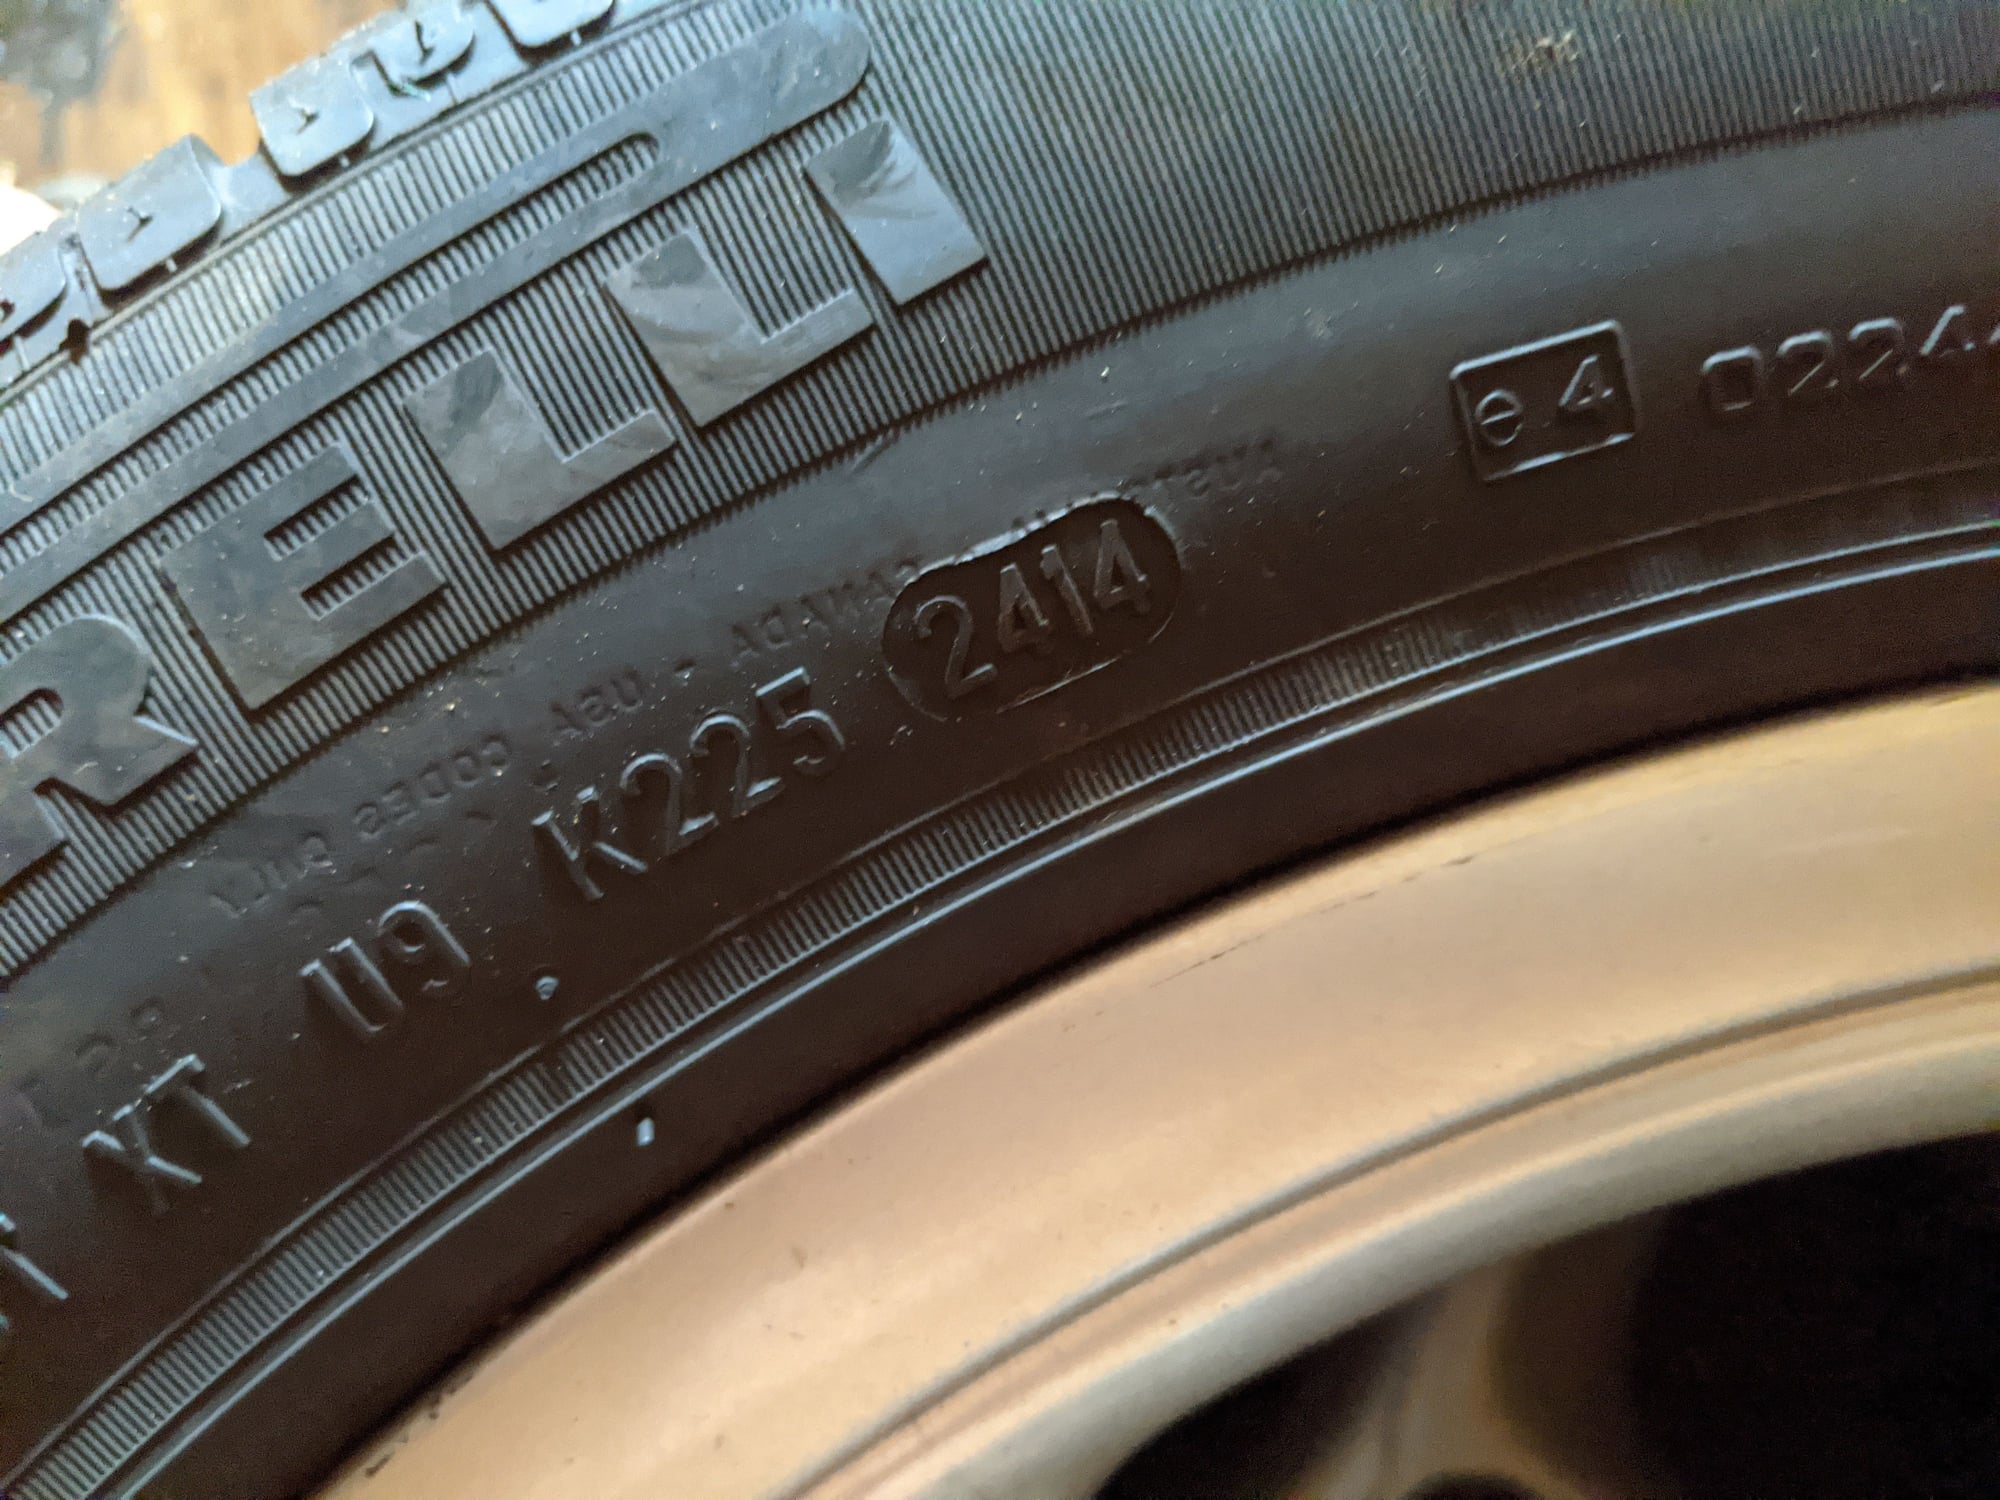 Wheels and Tires/Axles - 996/986 Winter Wheels and Tires - Used - 1999 to 2004 Porsche 911 - 1999 to 2004 Porsche Boxster - Annapolis, MD 21401, United States